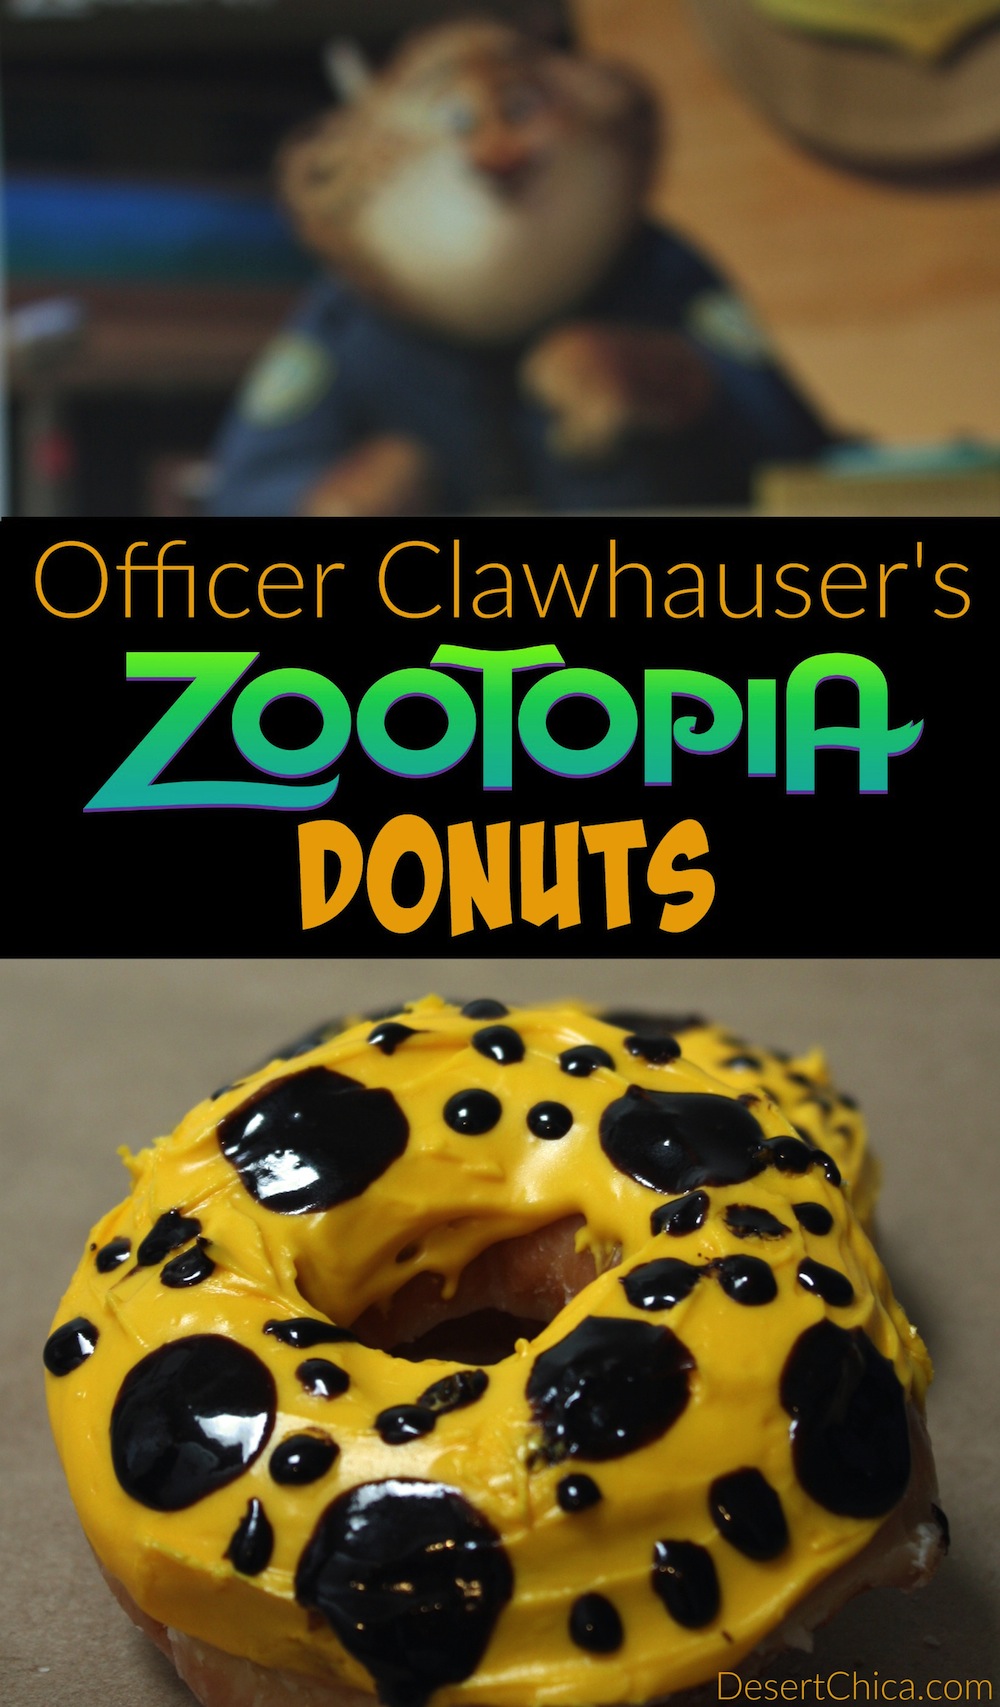 How to Make Zootopia Donuts